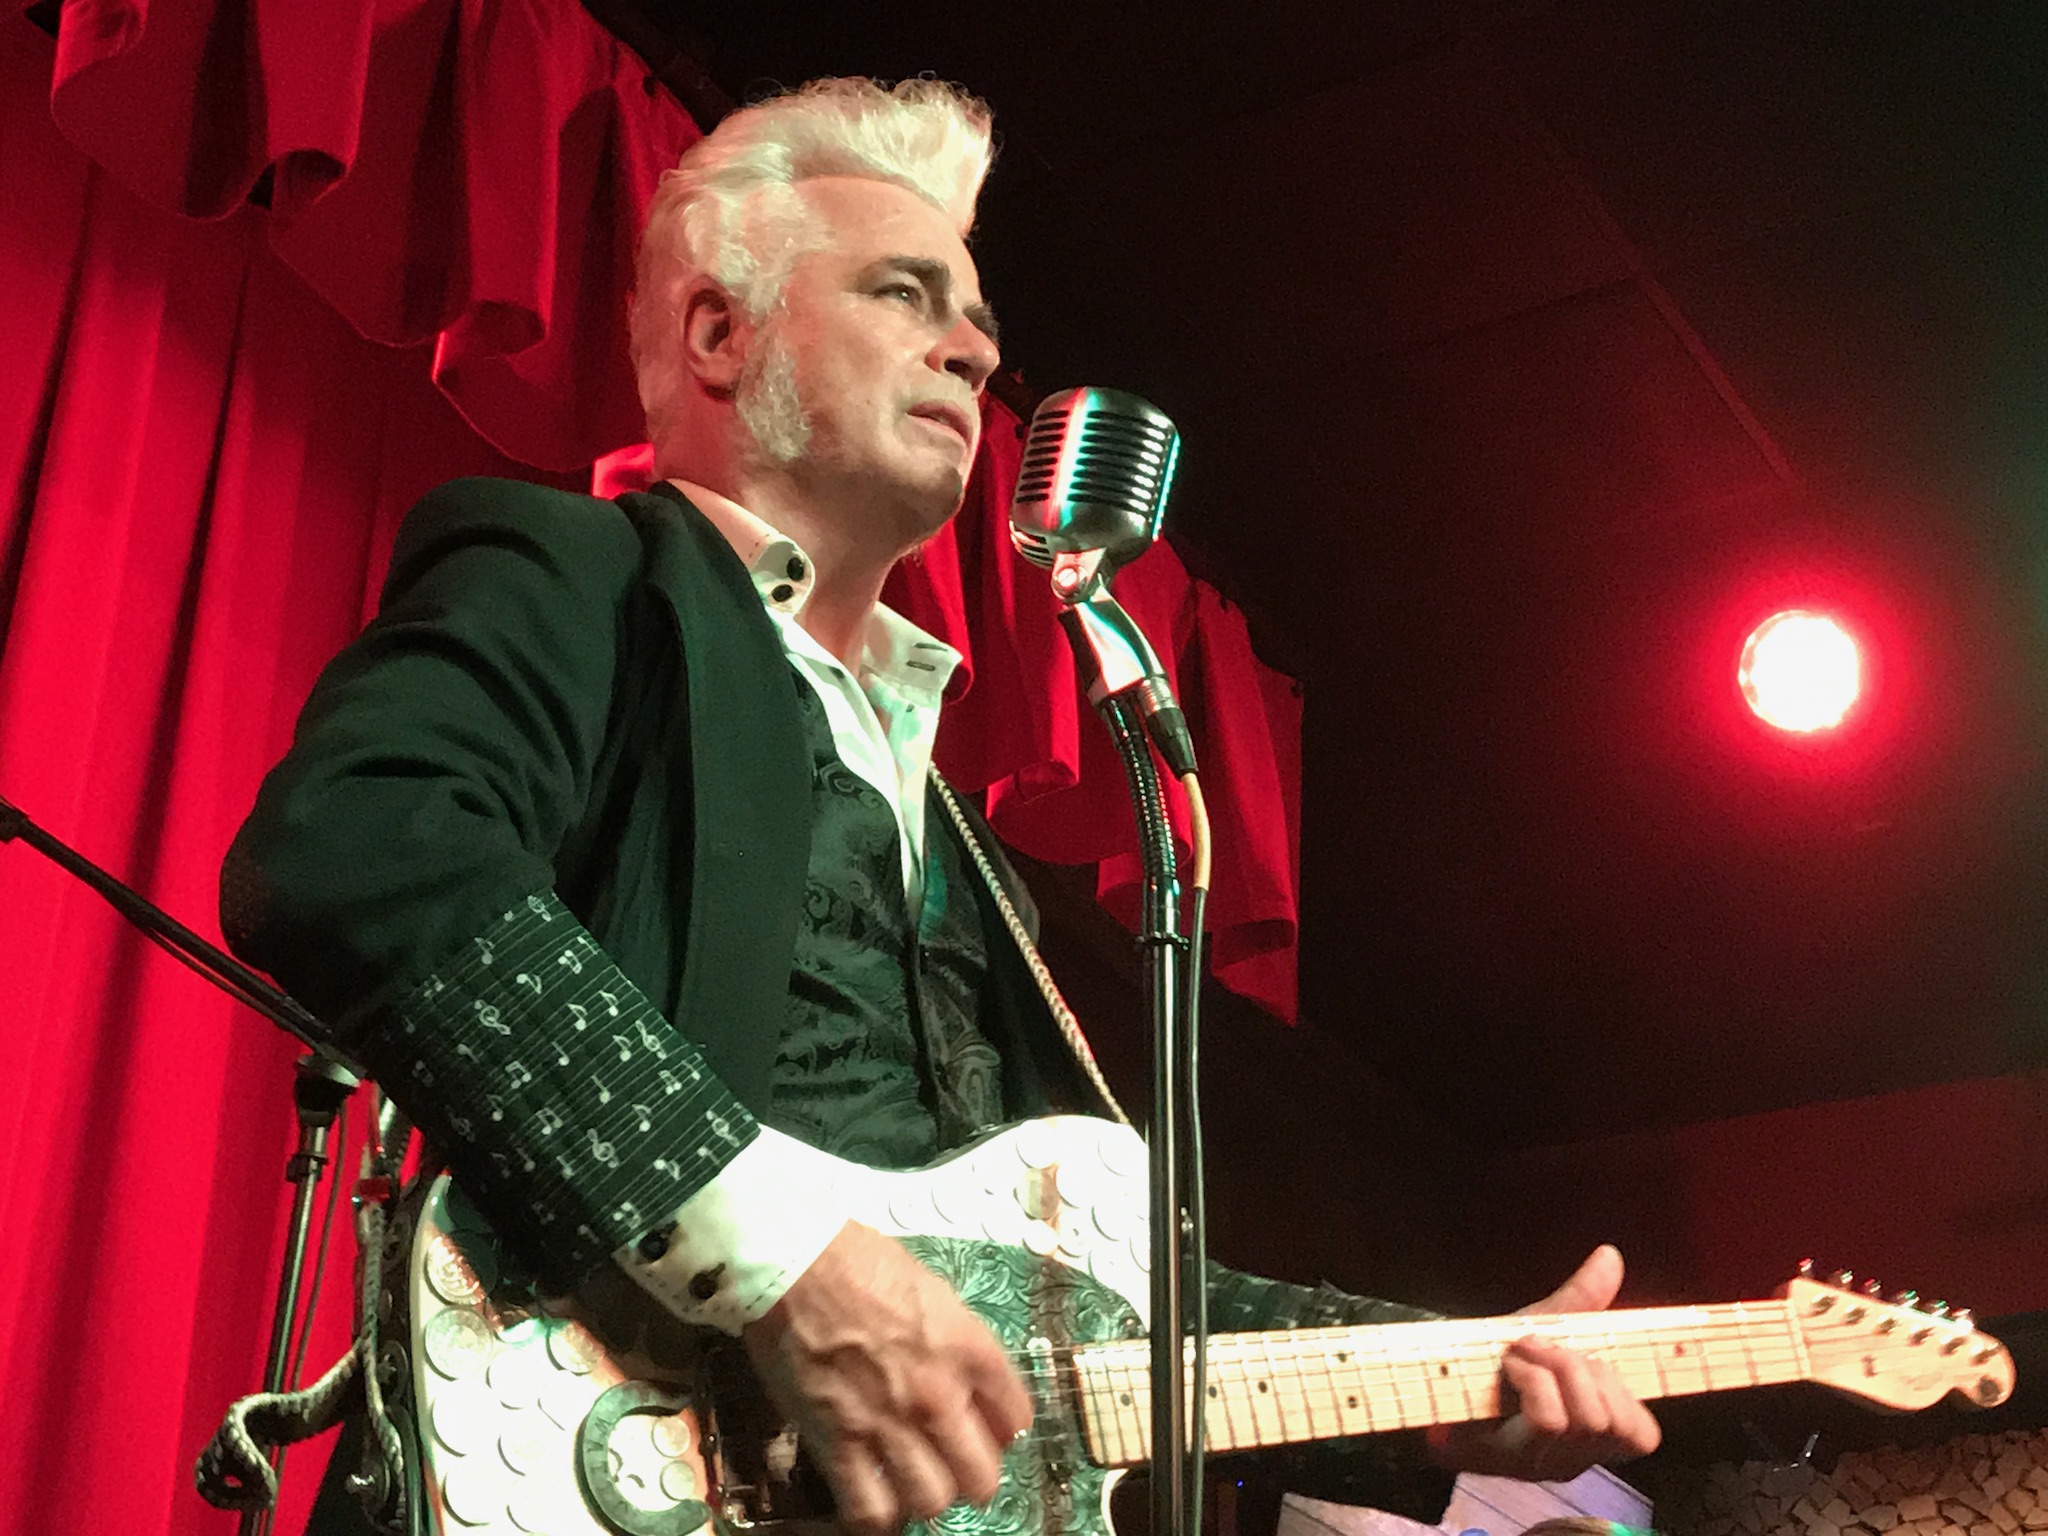 Dale Watson at Willie's Locally Known.  Photo taken by and the property of FourWalls.